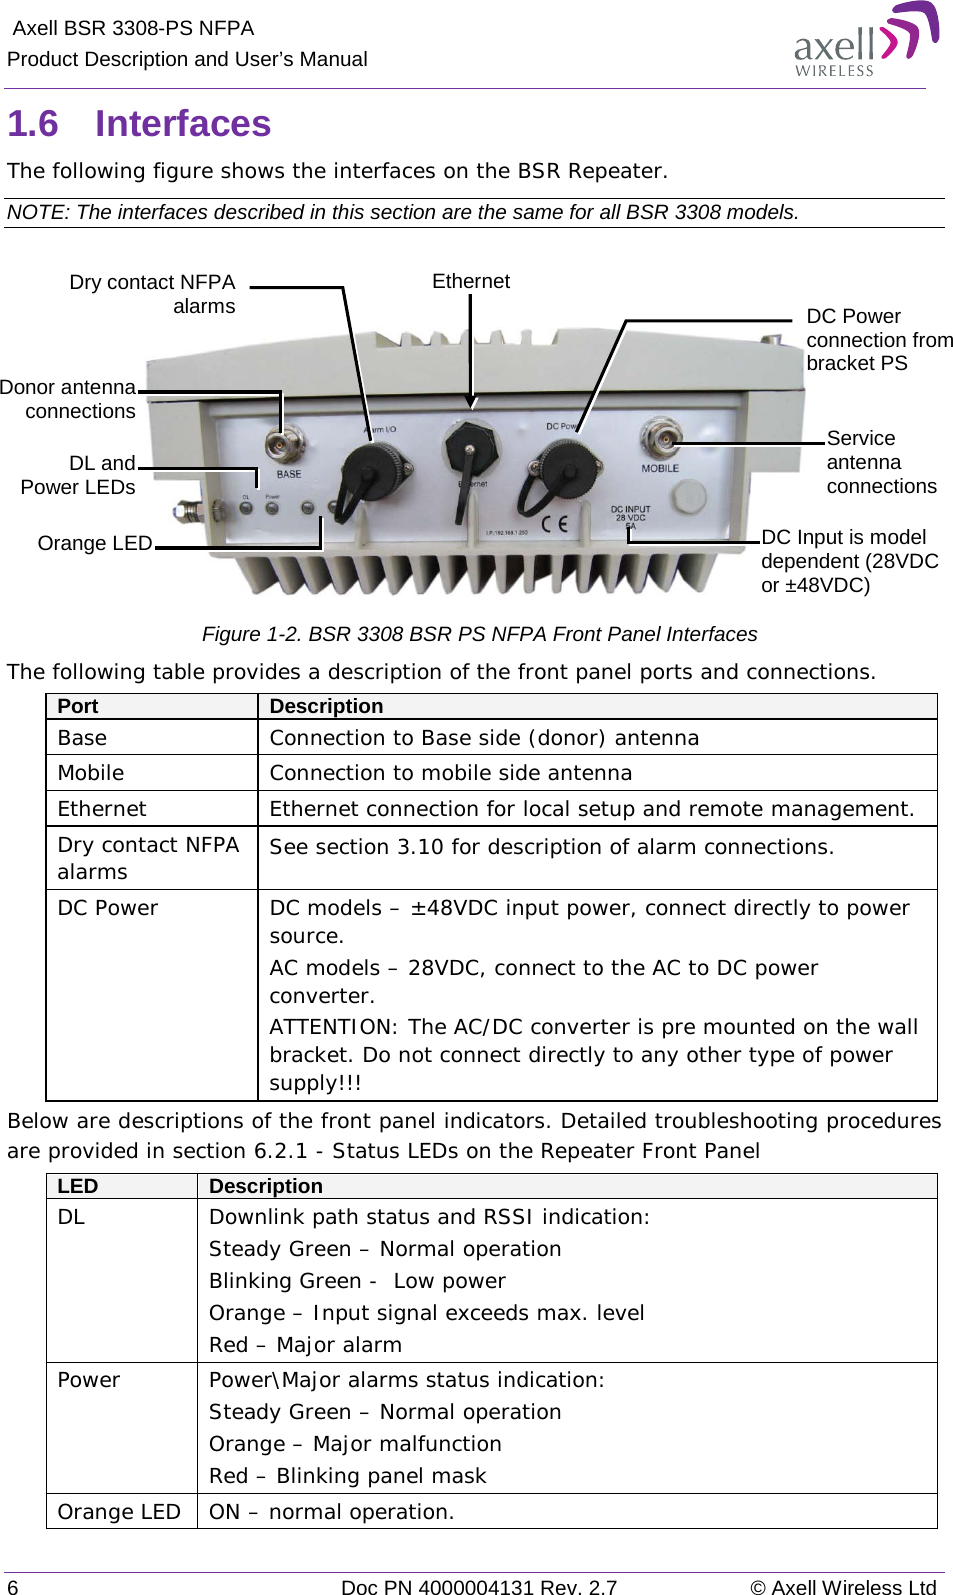  Axell BSR 3308-PS NFPA Product Description and User’s Manual 6  Doc PN 4000004131 Rev. 2.7 © Axell Wireless Ltd  1.6  Interfaces The following figure shows the interfaces on the BSR Repeater. NOTE: The interfaces described in this section are the same for all BSR 3308 models.     Figure  1-2. BSR 3308 BSR PS NFPA Front Panel Interfaces The following table provides a description of the front panel ports and connections.  Port Description Base Connection to Base side (donor) antenna  Mobile Connection to mobile side antenna Ethernet   Ethernet connection for local setup and remote management.  Dry contact NFPA  alarms See section  3.10 for description of alarm connections. DC Power DC models – ±48VDC input power, connect directly to power source. AC models – 28VDC, connect to the AC to DC power converter. ATTENTION: The AC/DC converter is pre mounted on the wall bracket. Do not connect directly to any other type of power supply!!! Below are descriptions of the front panel indicators. Detailed troubleshooting procedures are provided in section  6.2.1 - Status LEDs on the Repeater Front Panel LED Description DL Downlink path status and RSSI indication: Steady Green – Normal operation Blinking Green -  Low power Orange – Input signal exceeds max. level Red – Major alarm Power Power\Major alarms status indication: Steady Green – Normal operation Orange – Major malfunction Red – Blinking panel mask Orange LED ON – normal operation. Service antenna connections  DC Power connection from bracket PS  Donor antenna connections  DL and Power LEDs Dry contact NFPA alarms  Ethernet Orange LED DC Input is model dependent (28VDC or ±48VDC) 